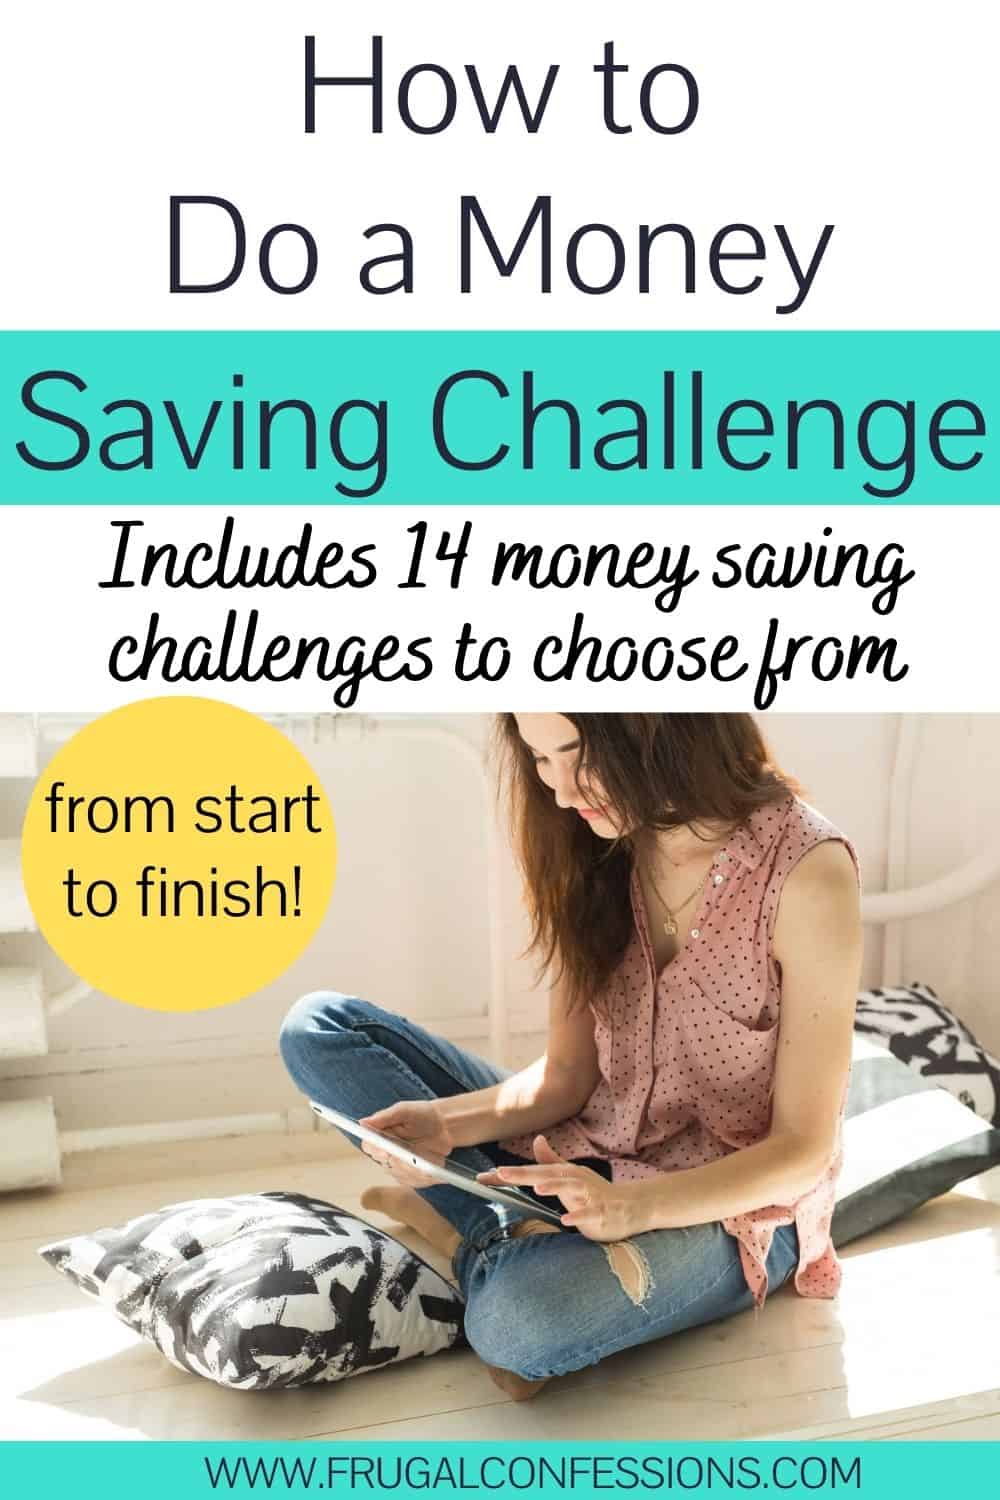 woman on floor smiling with ipad, text overlay "how to do a money saving challenge"